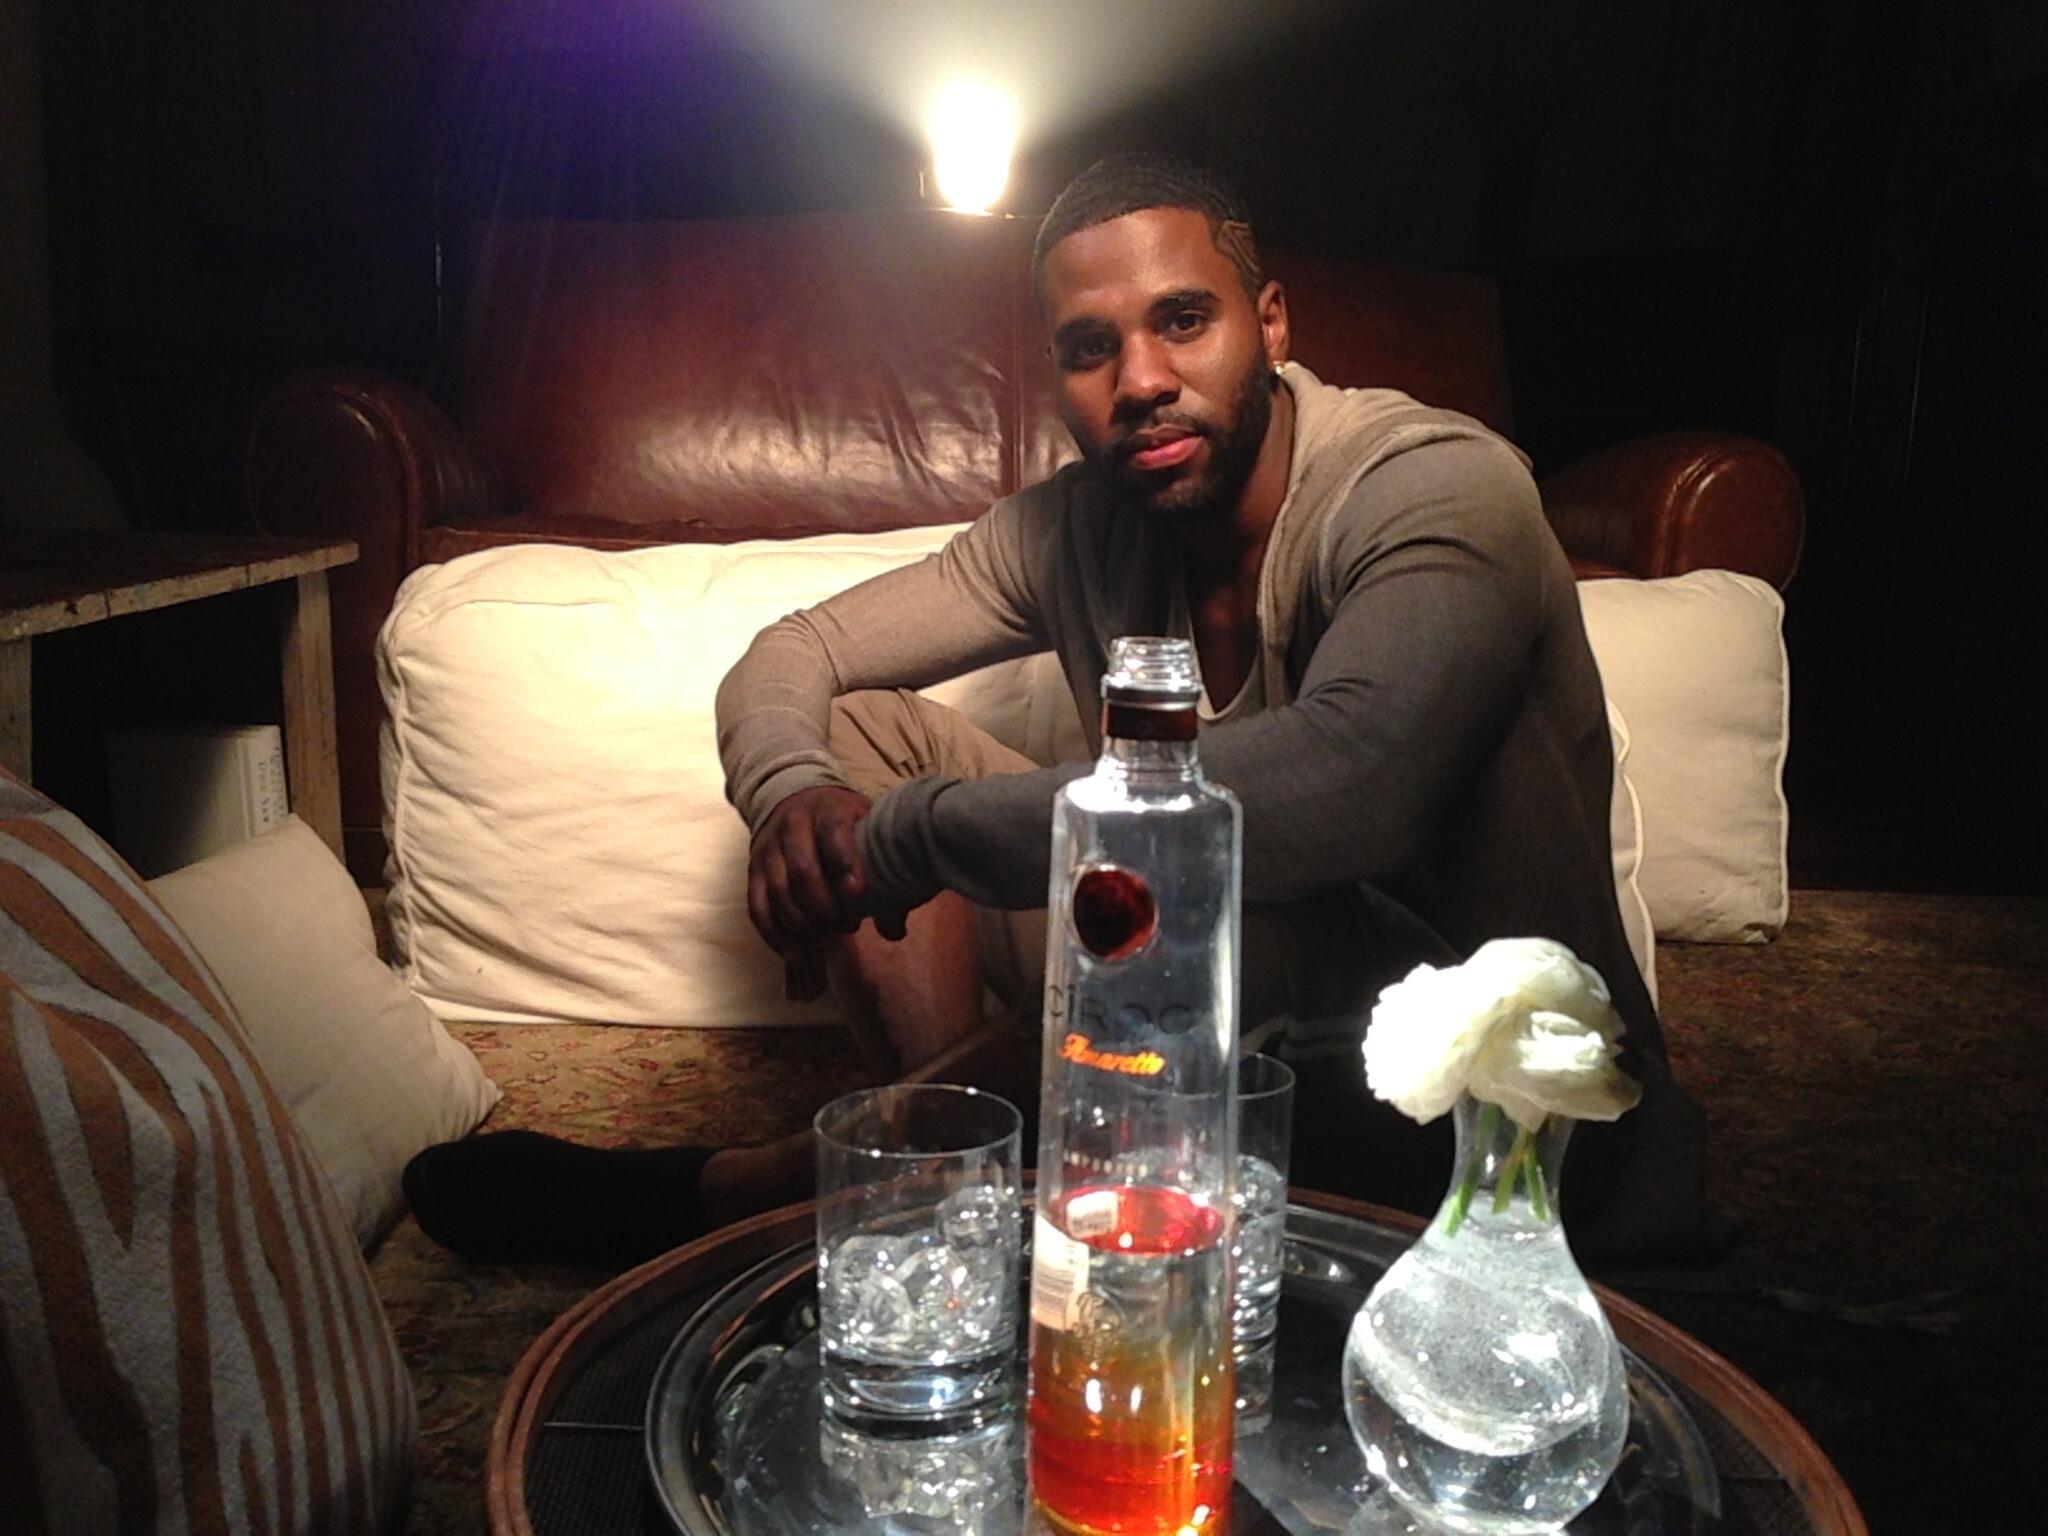 Jason Derulo on X: "In the home movie theatre. Shouts out to @ciroc for providing an unlimited Supply! http://t.co/eVVCbQSiTO" / X